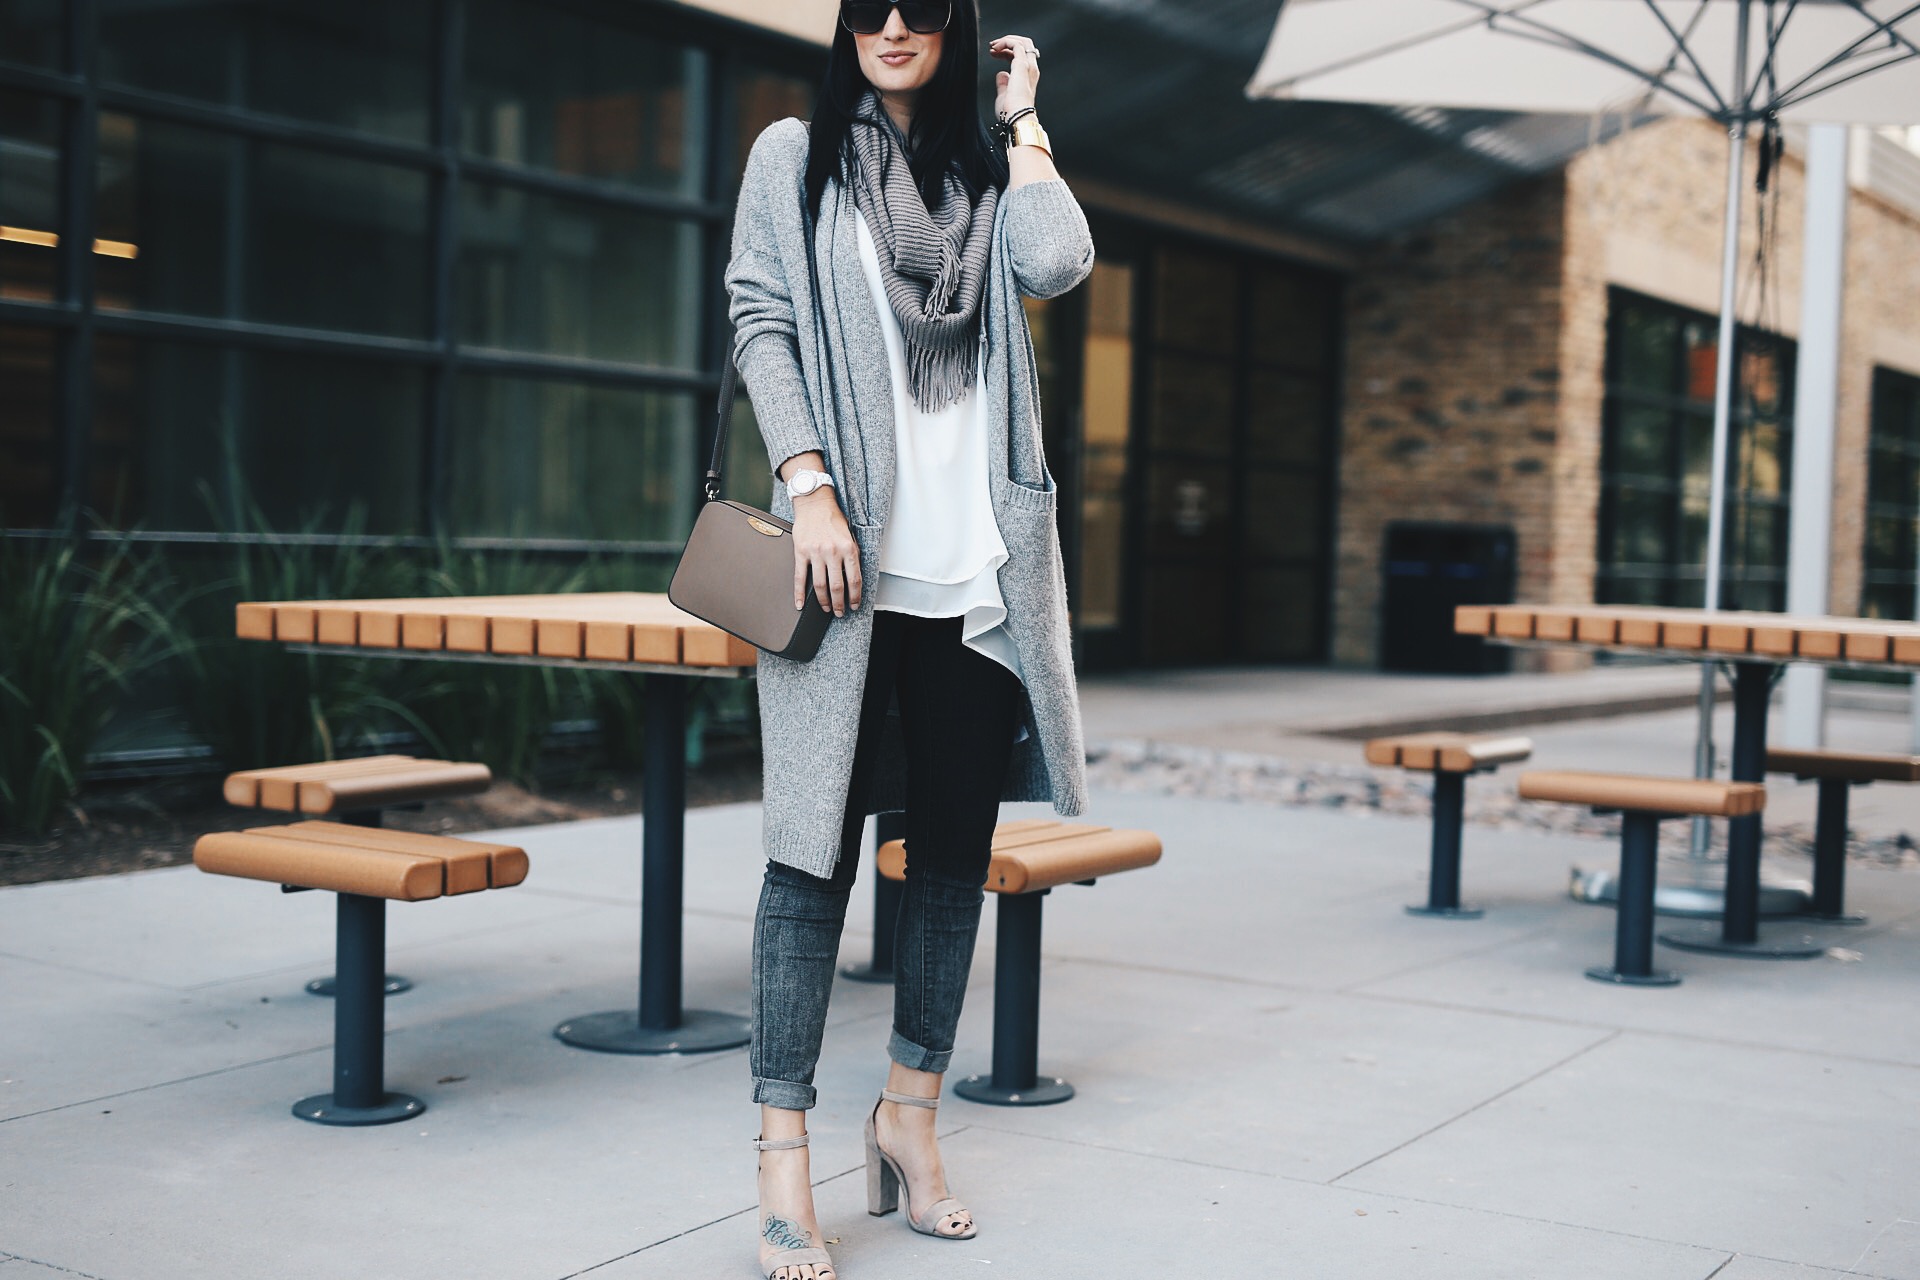 Ombre Jeans | ombre style ideas | ombre fashion | how to style ombre jeans | fall fashion tips | fall outfit ideas | fall style tips | what to wear for fall | cool weather fashion | fashion for fall | style tips for fall | outfit ideas for fall || Dressed to Kill #ombre #fallfashion #greycardigan